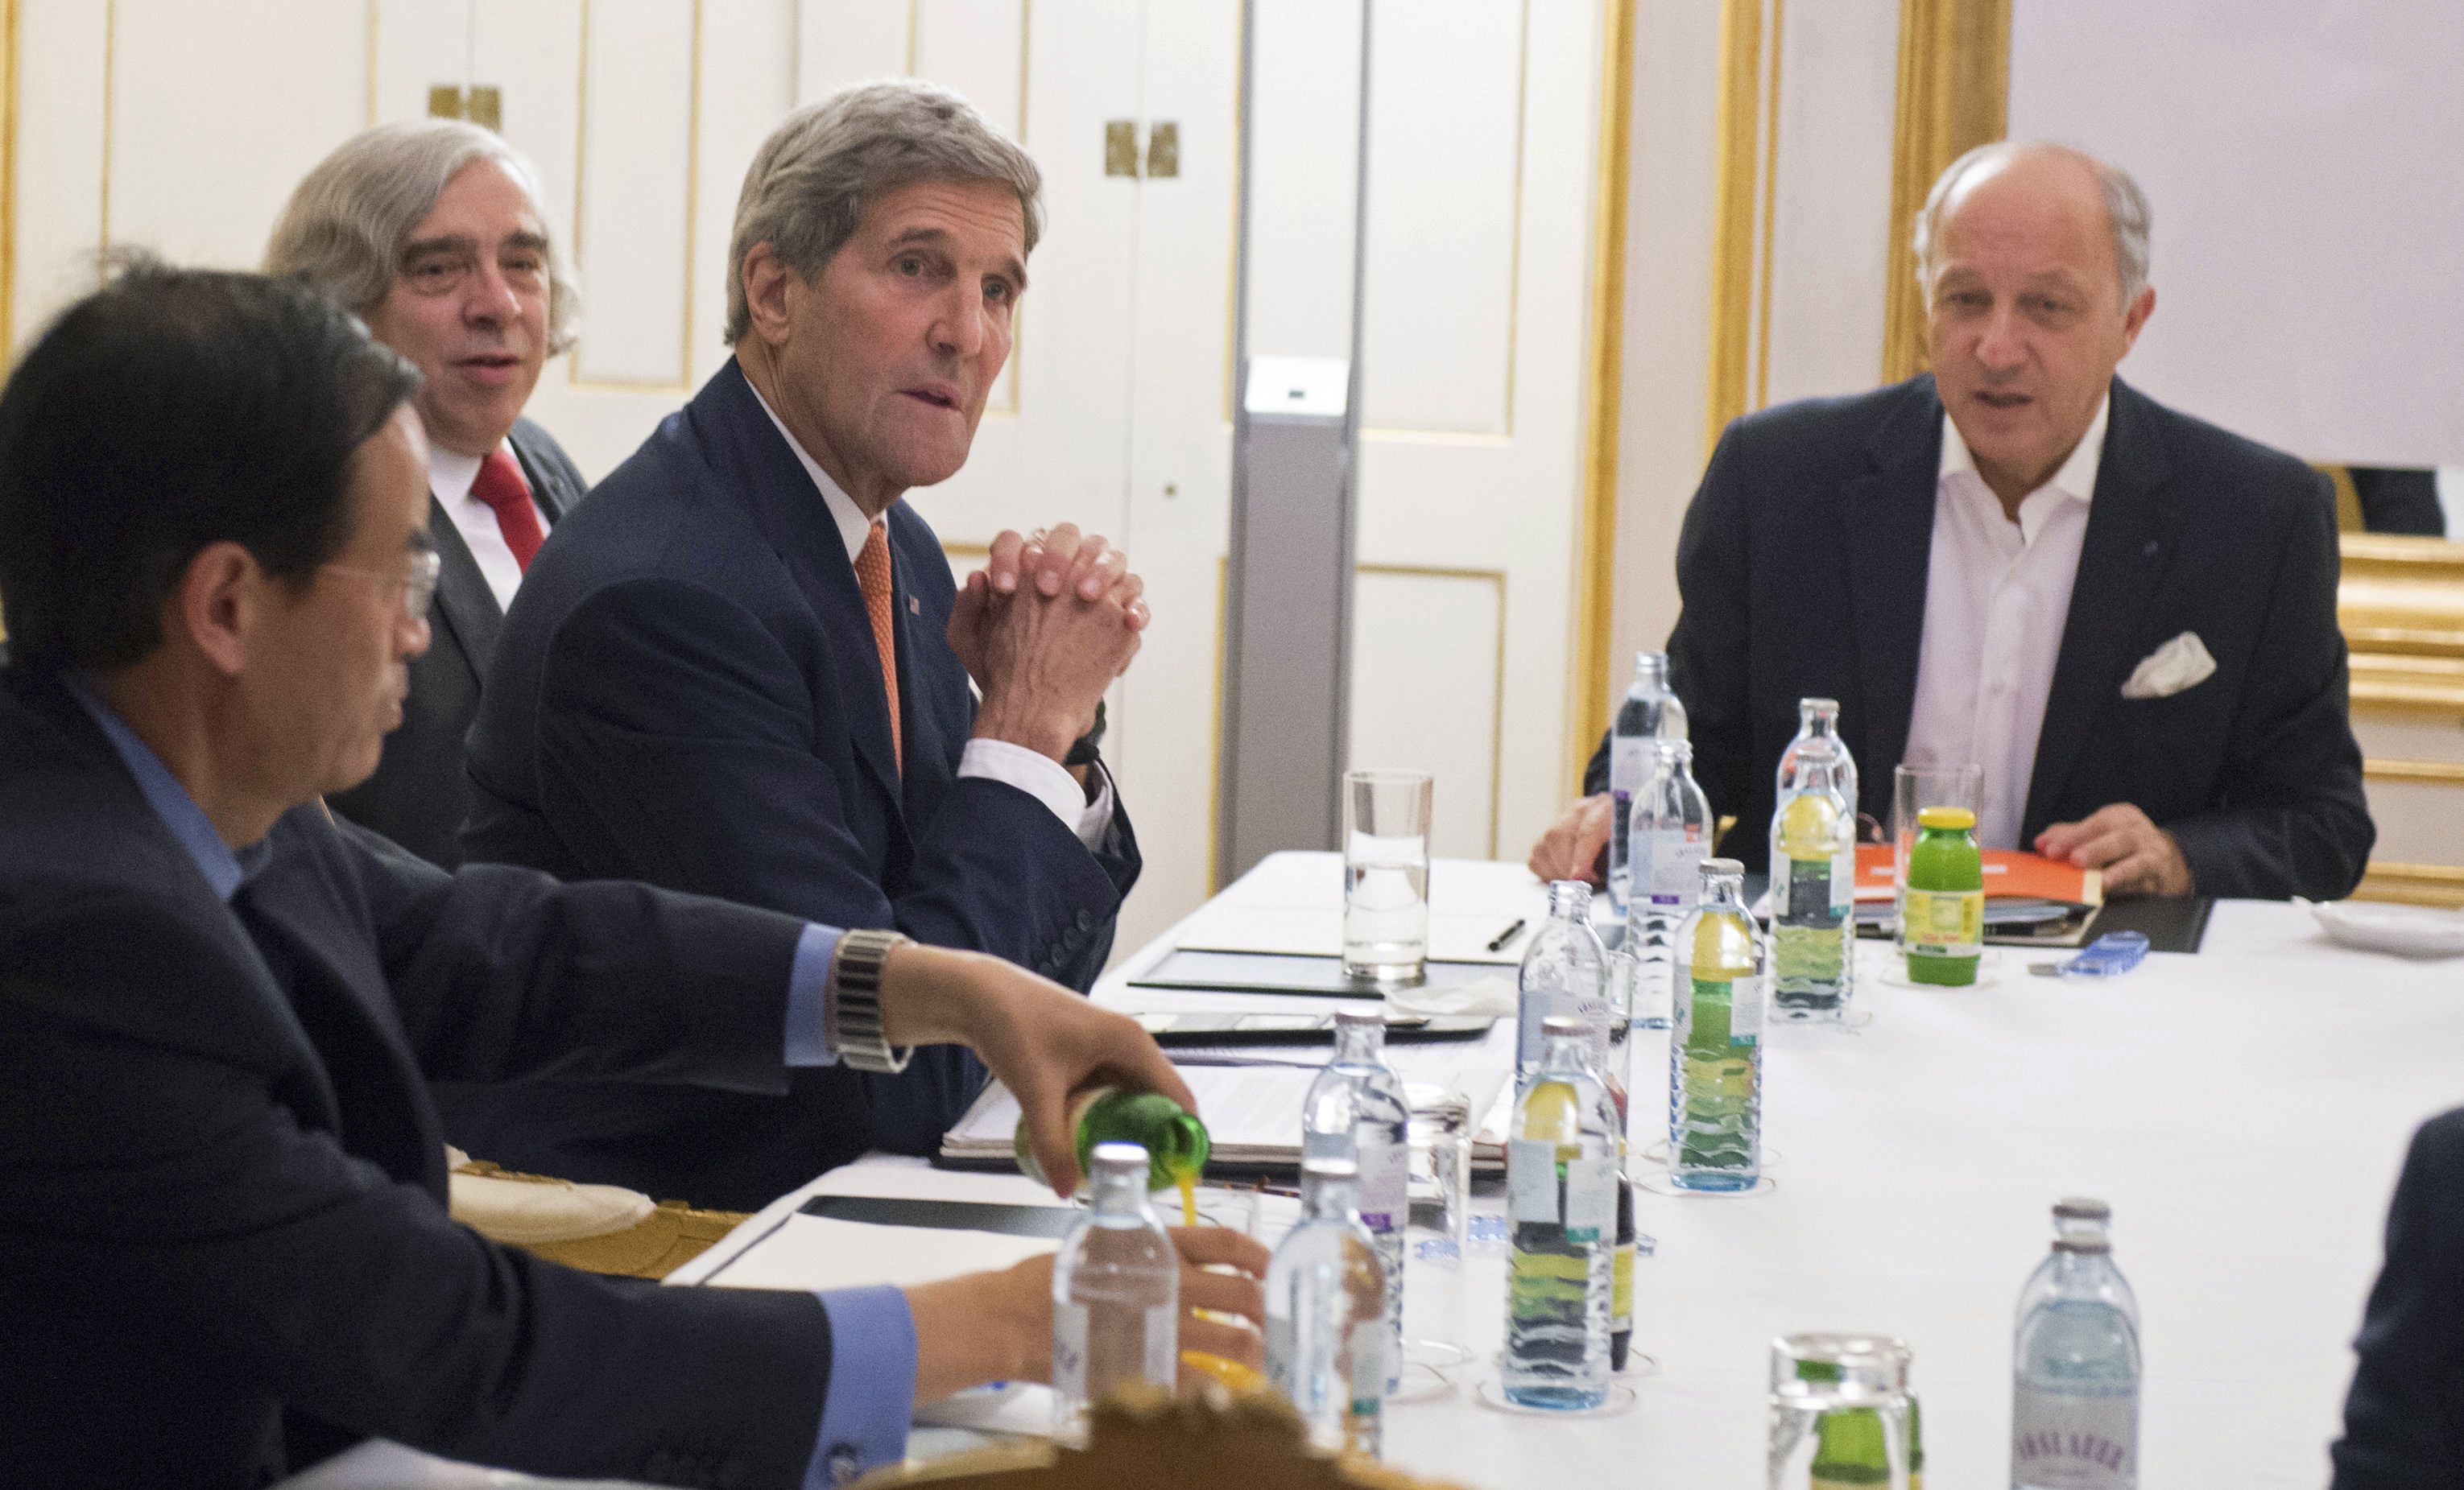 U.S. Secretary of State John Kerry (3rd R), U.S. Secretary of Energy Ernest Moniz (2nd R) and French Foreign Minister Laurent Fabius (R) meet at the Palais Coburg, the venue for nuclear talks in Vienna, Austria July 14, 2015. Iran has accepted a so-called 